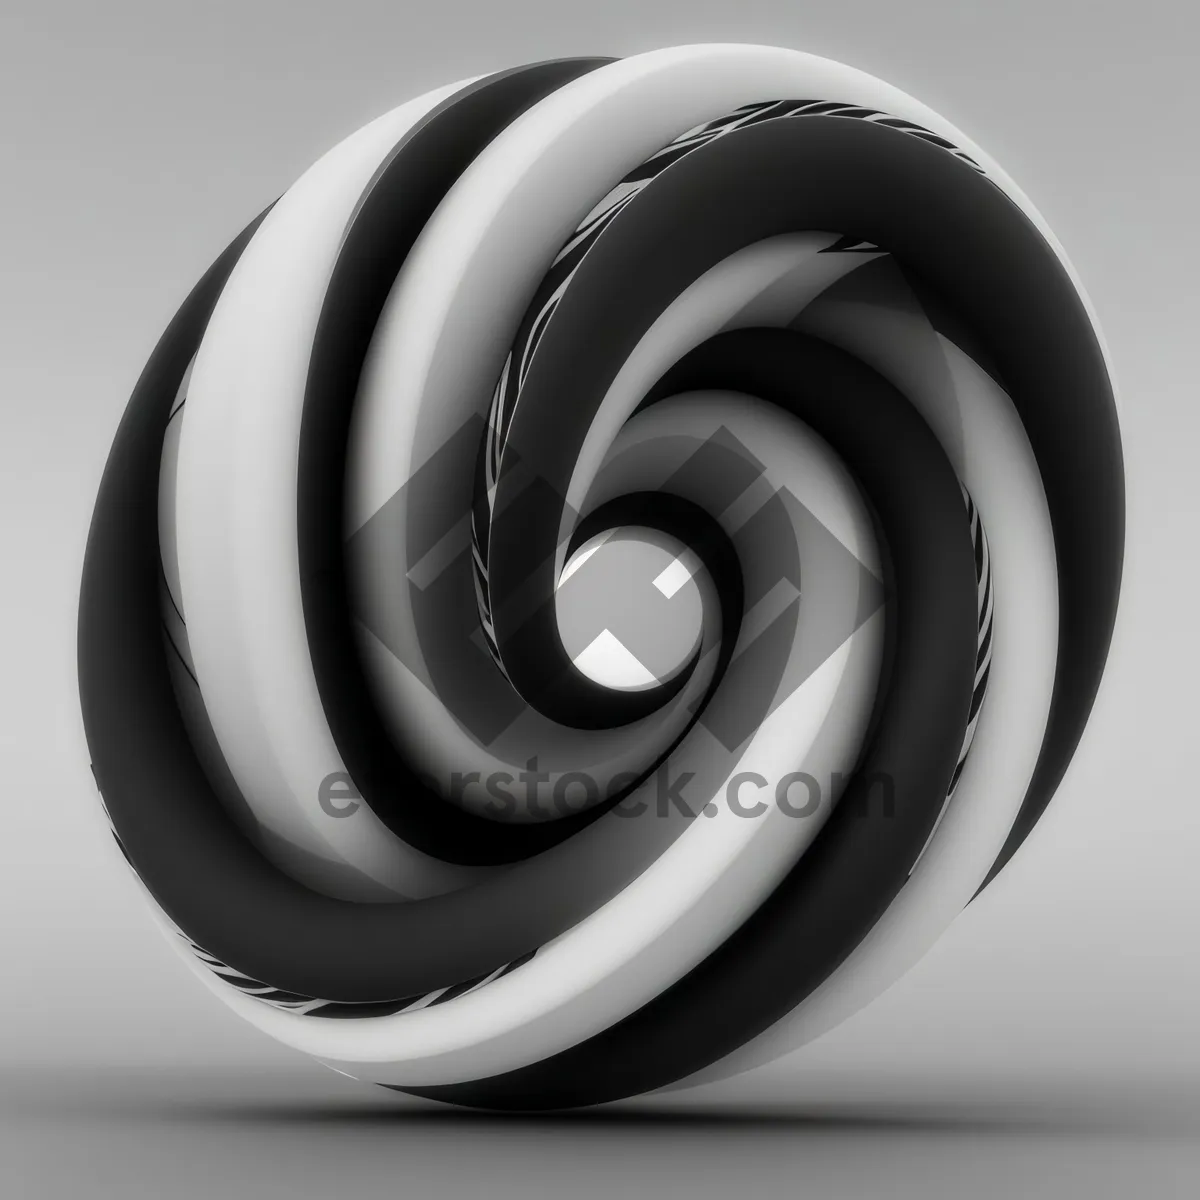 Picture of Shiny 3D Digital Graphic Swirl Wallpaper Art